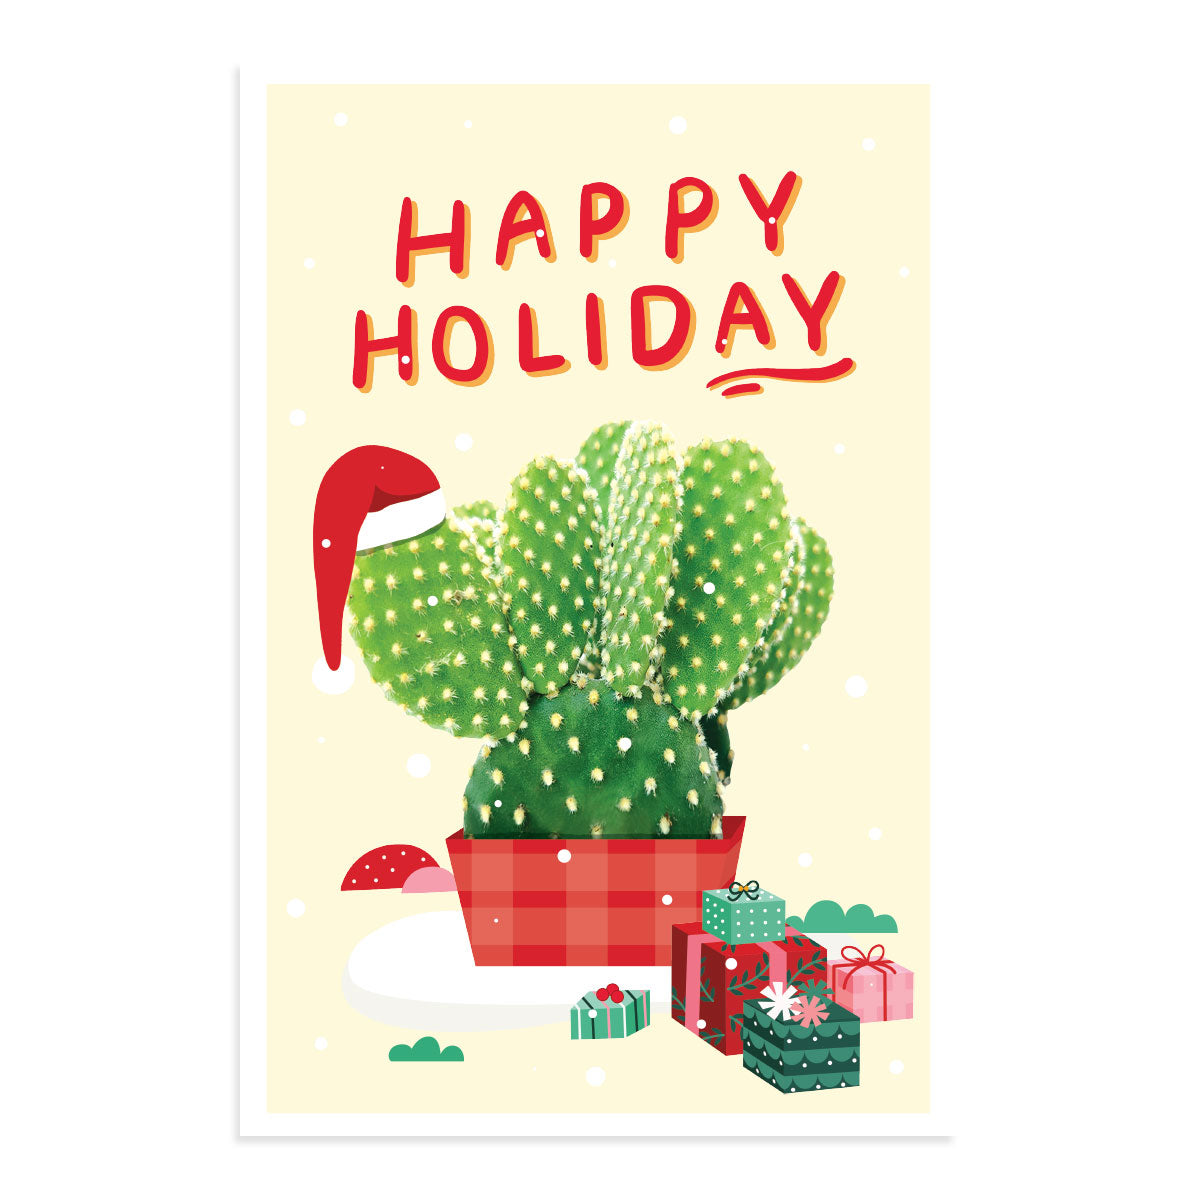 Succulent Happy Holiday Card for sale, Cactus Holiday Greeting Card, Succulents Greeting Card, Succulents Gift Ideas